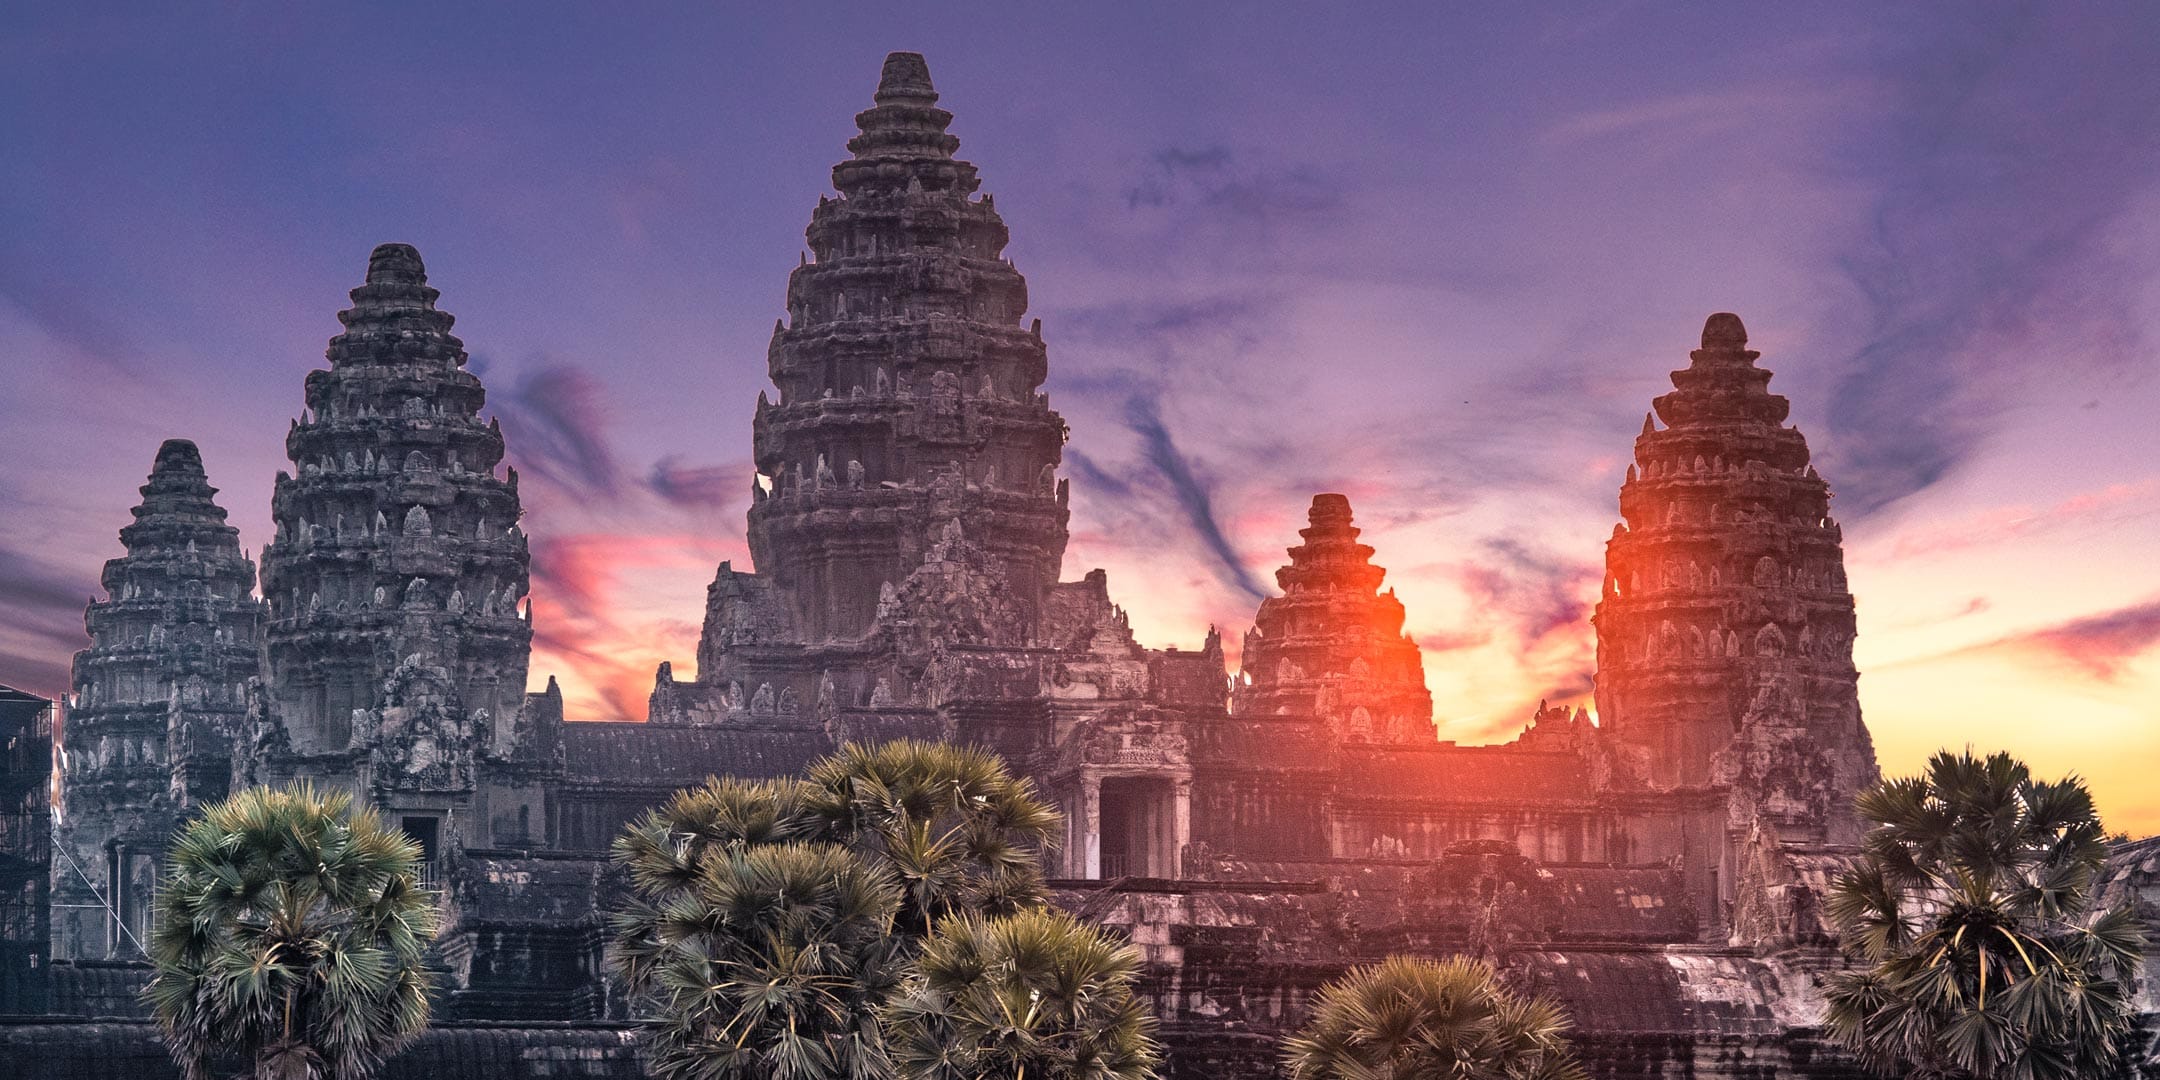 the-ultimate-guide-for-visiting-Angkor-Wat